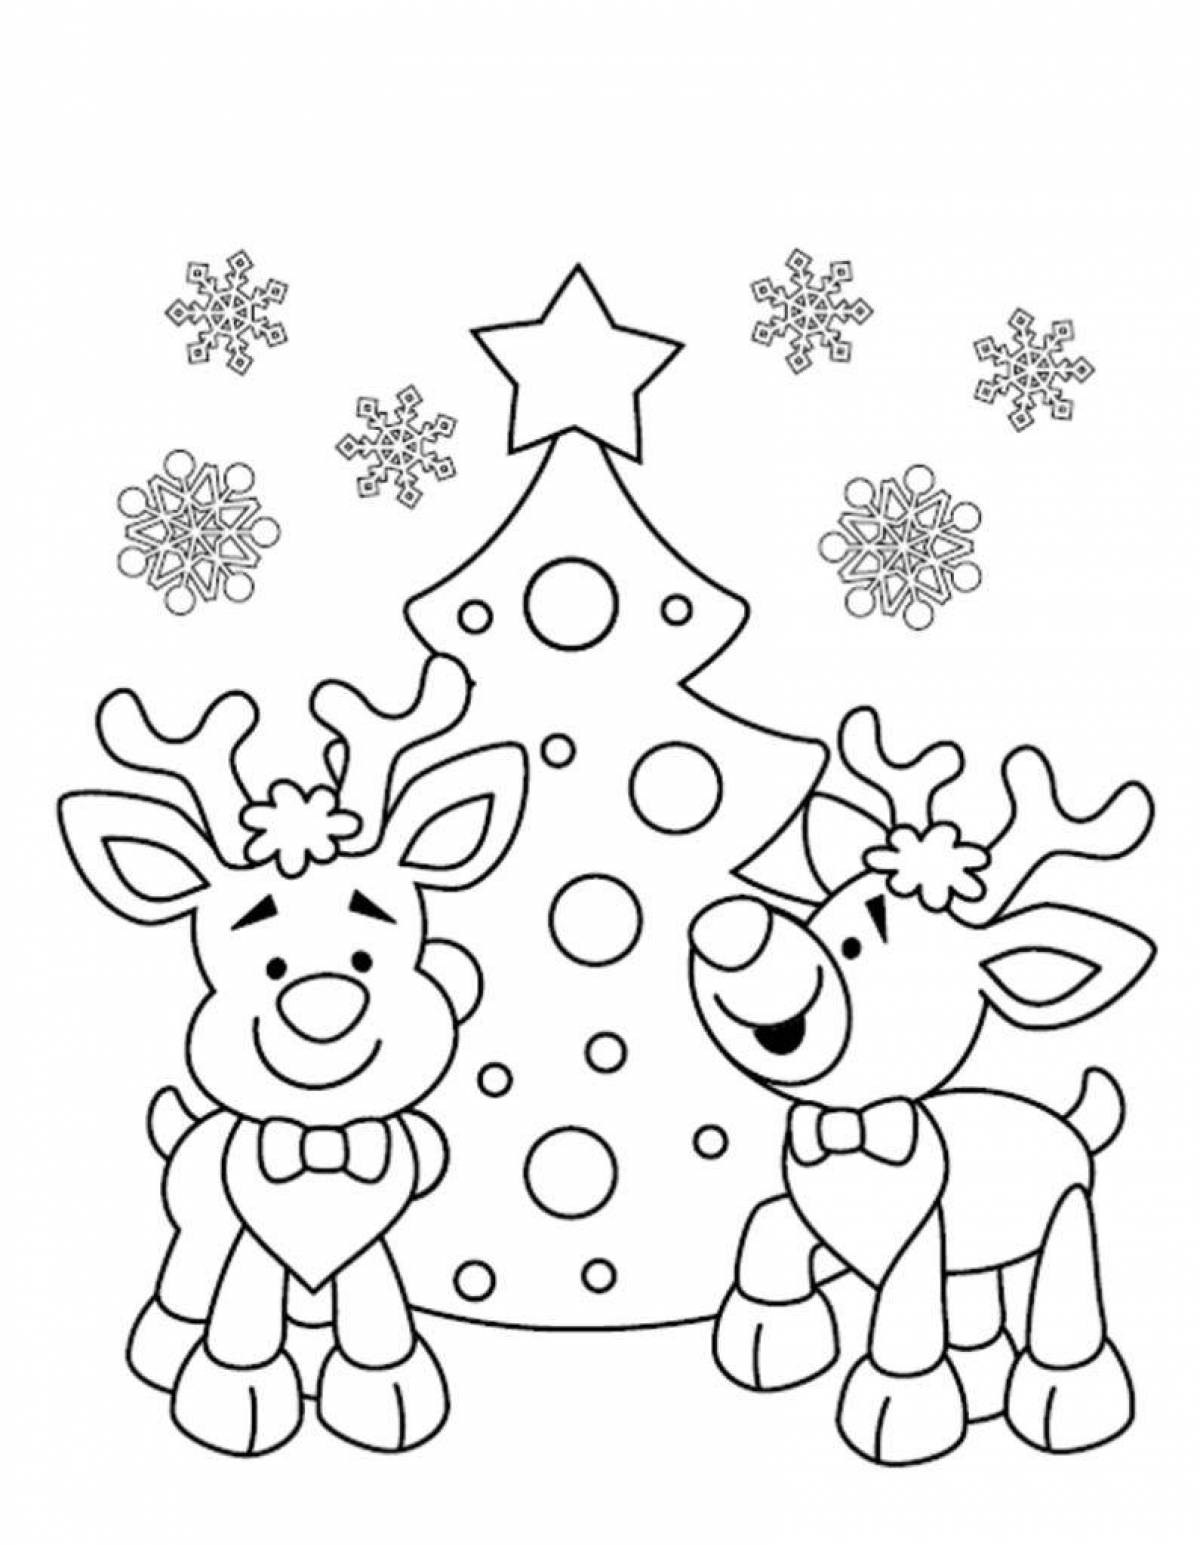 Picturesque Christmas coloring book for children 3-4 years old